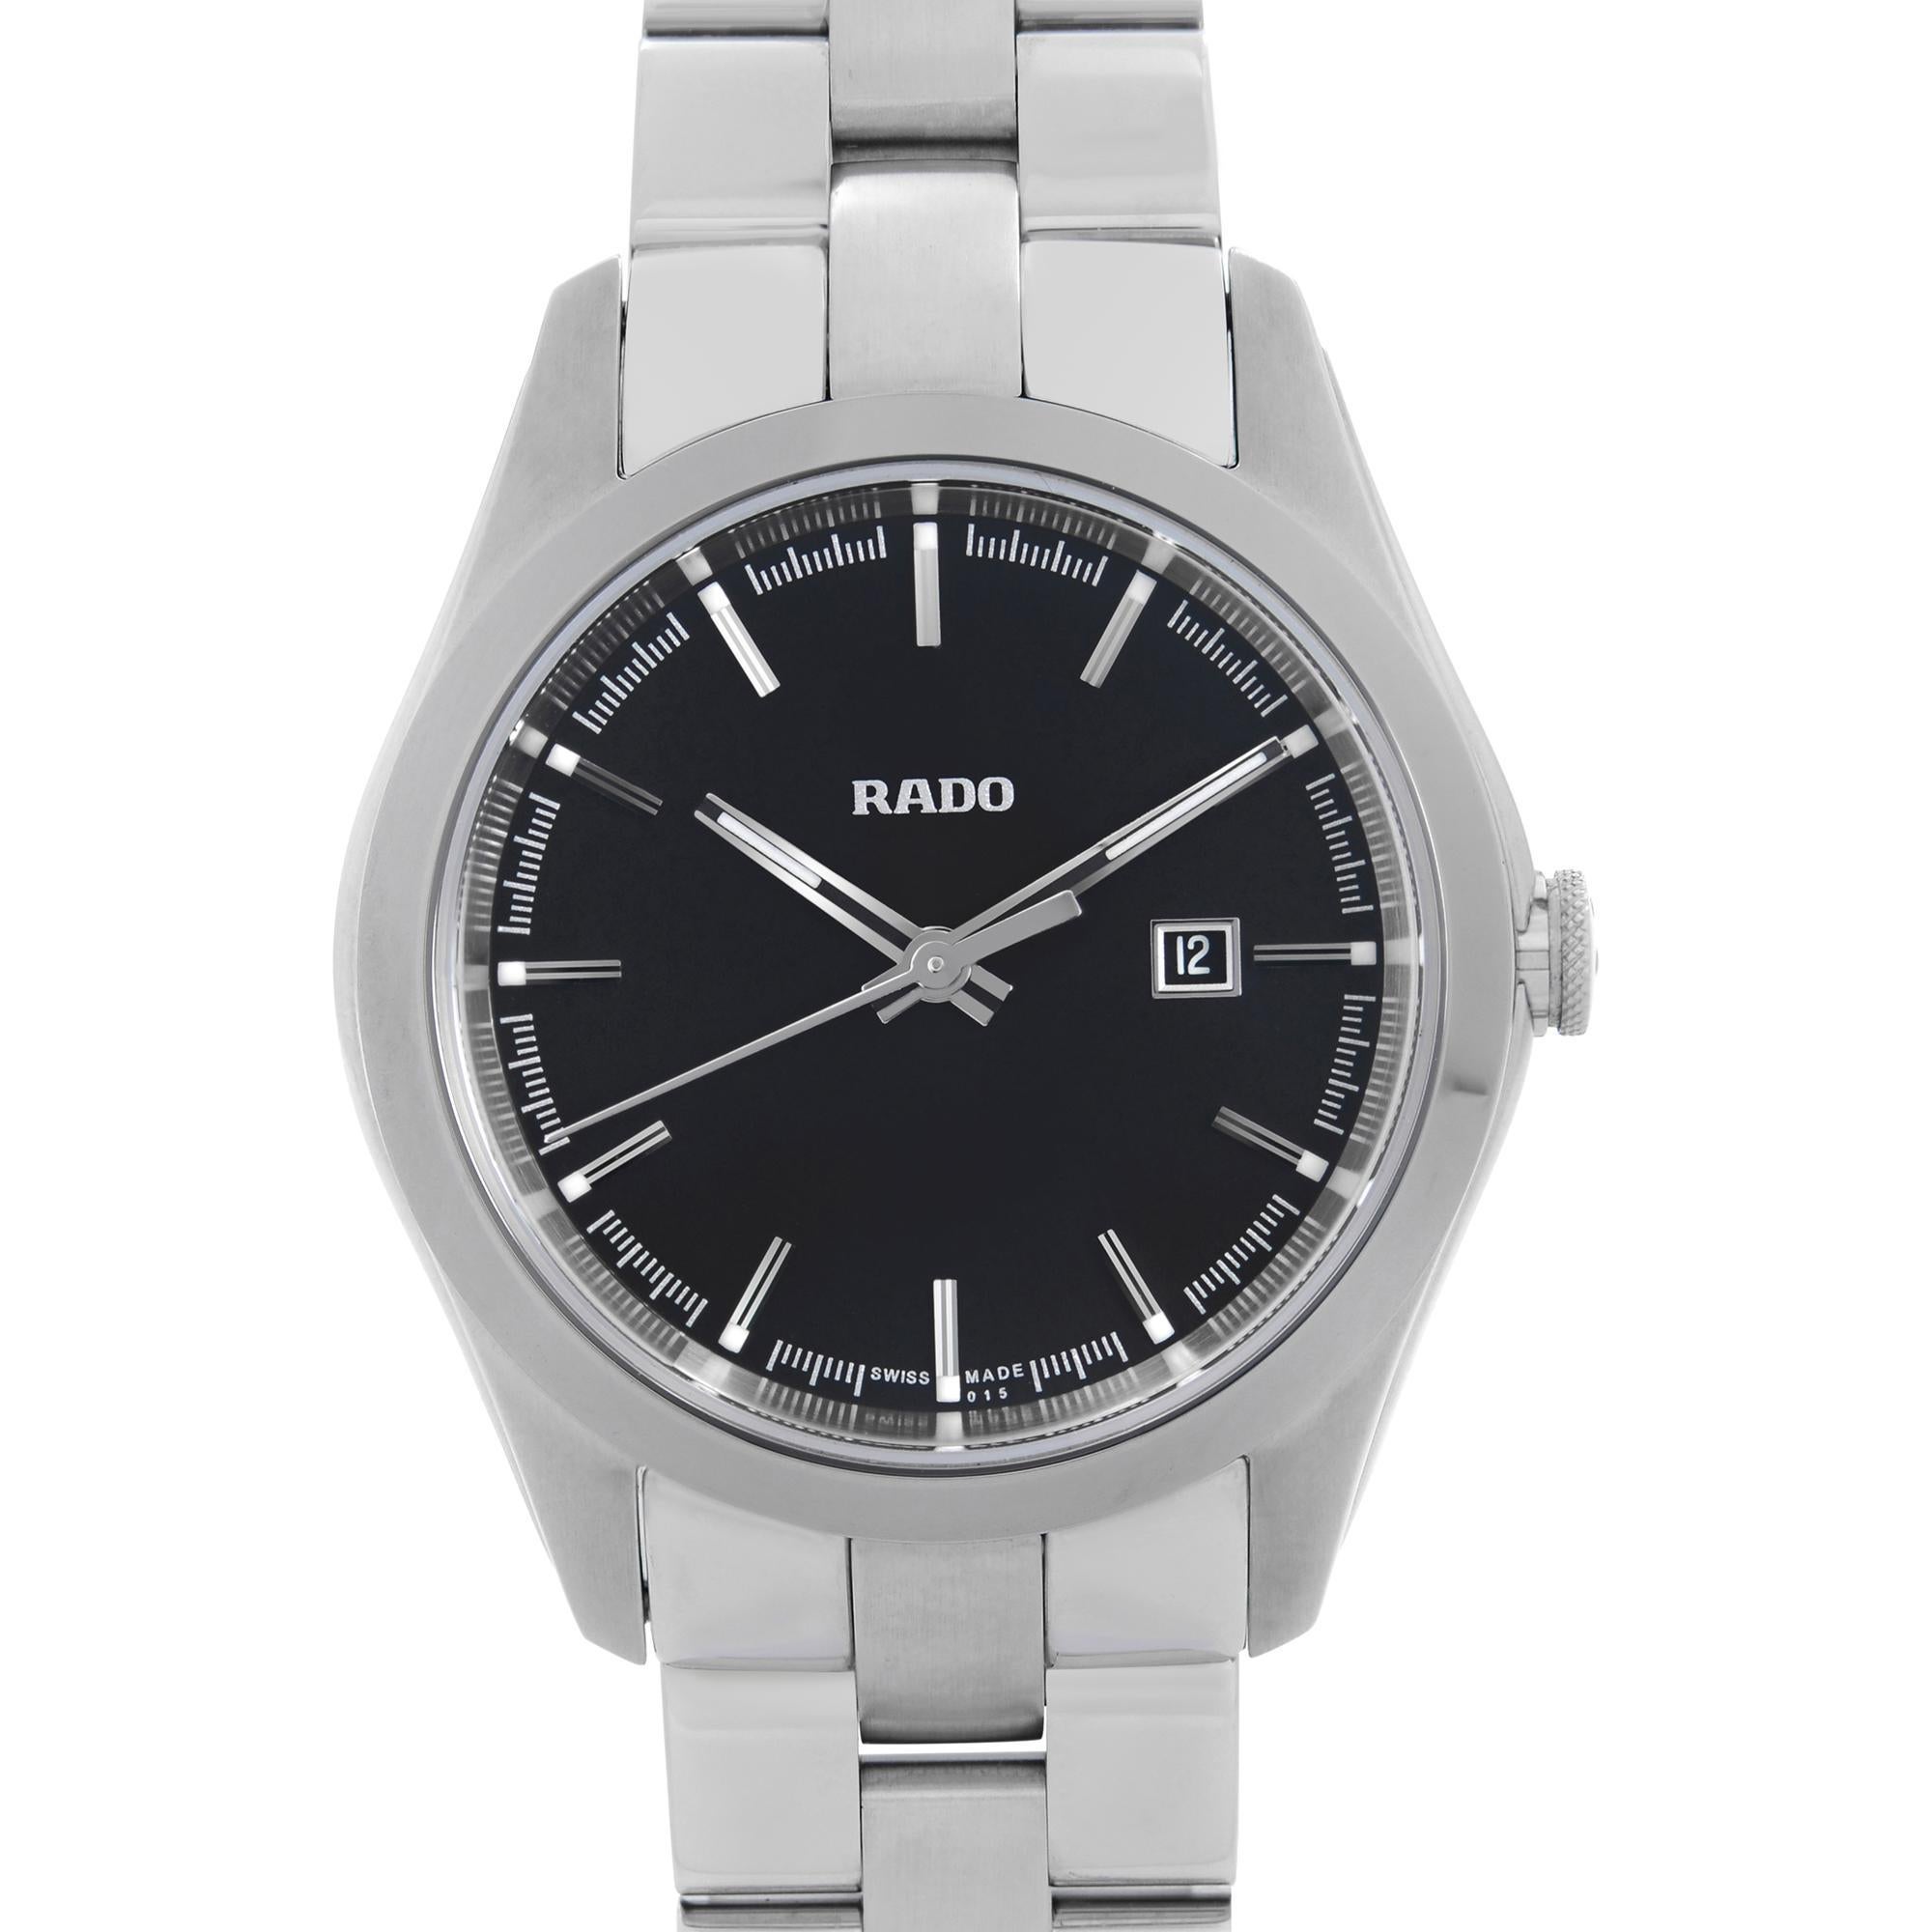 Unworn Rado Hyperchrome 31mm Quartz Watch R32110153. This Beautiful Ladies Timepiece is Powered By a Quartz Movement (Battery) and Features: Stainless Steel Case and Bracelet, Fixed Silver-Tone Ceramic Bezel, Black Dial with Luminous Silver-Tone